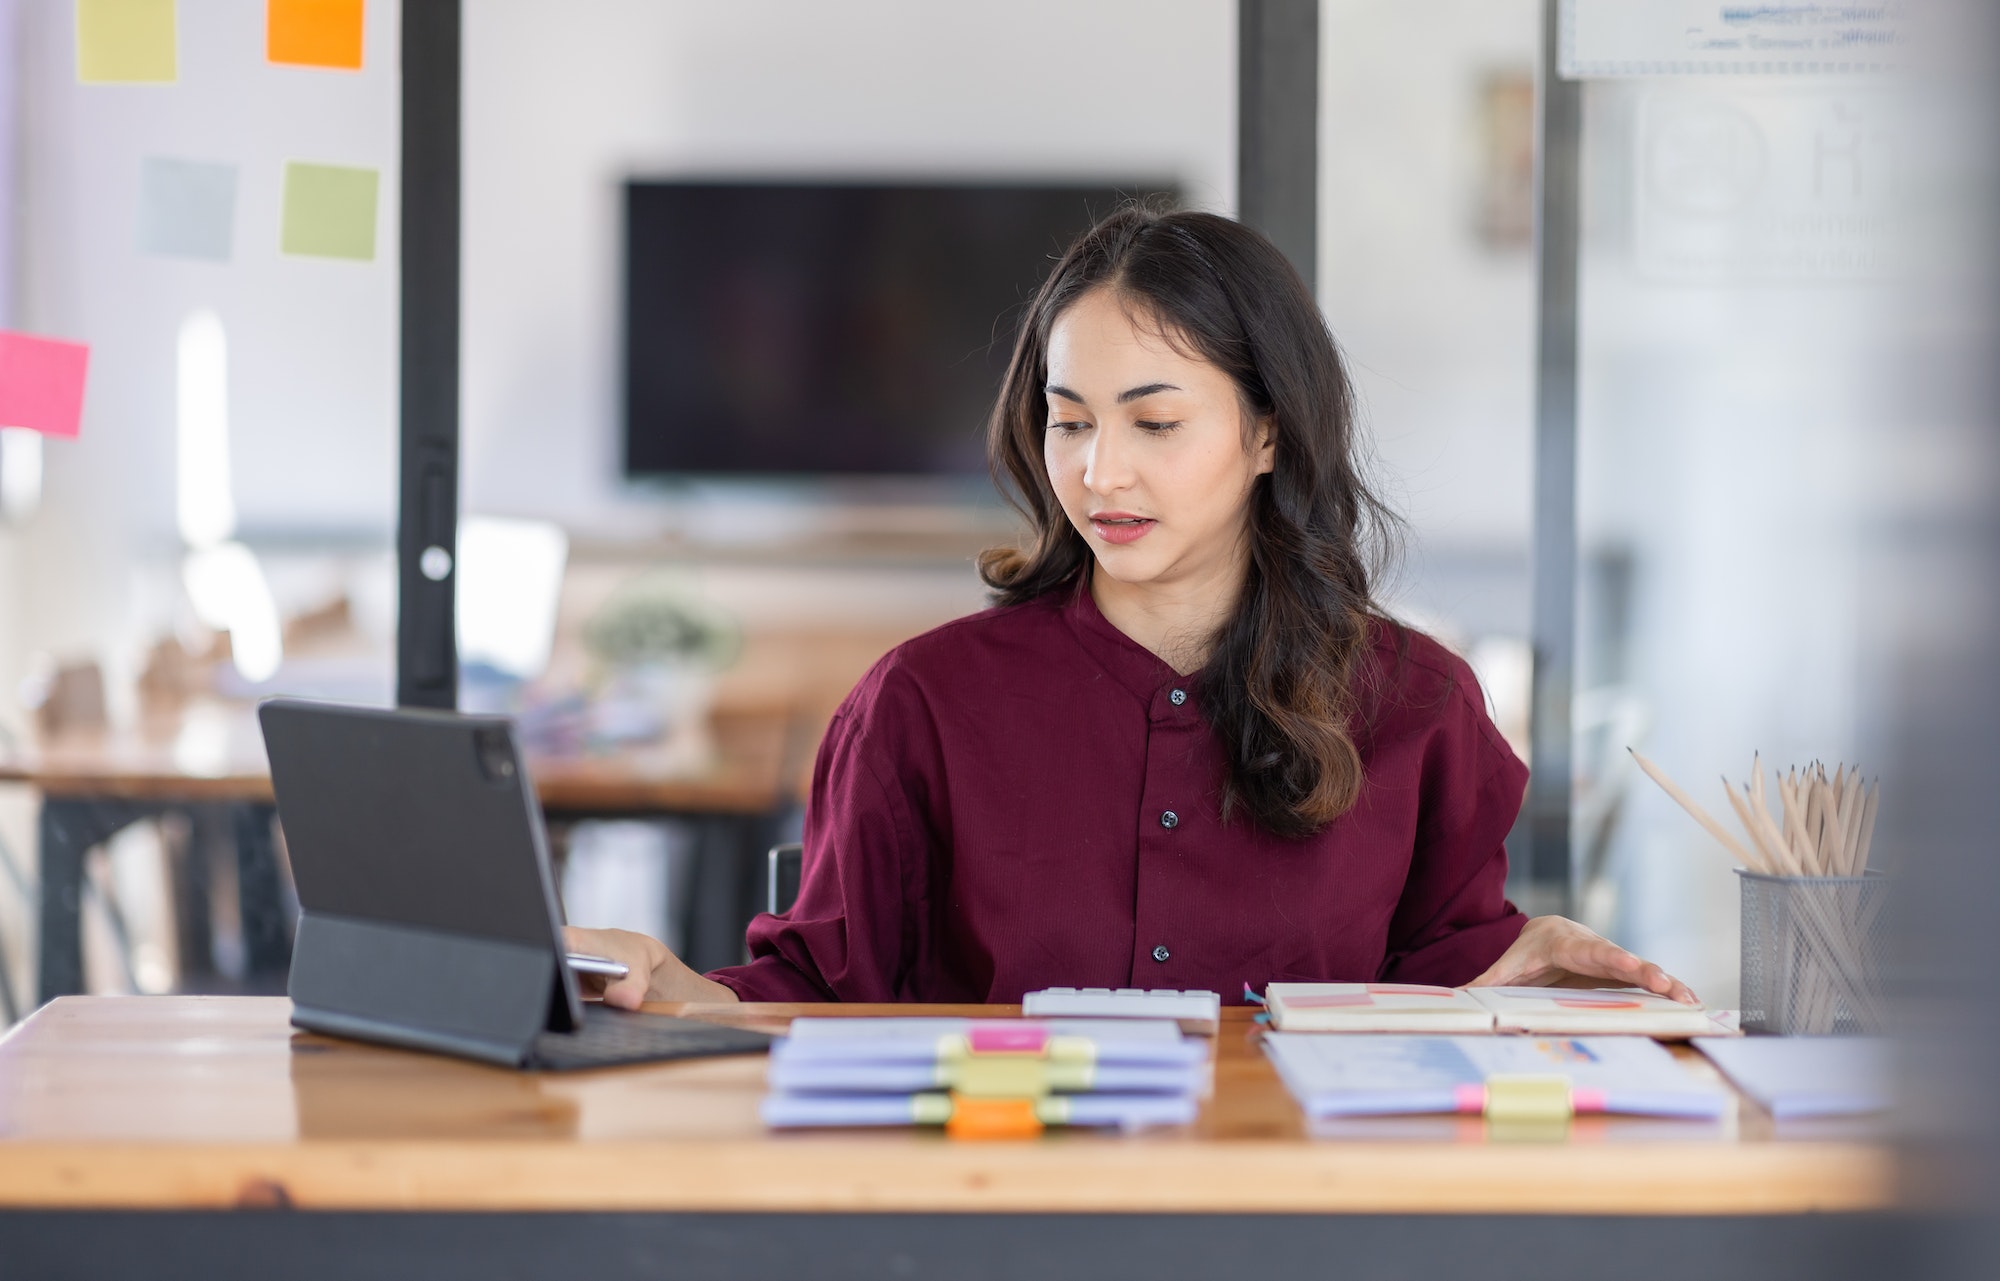 Business female employee with many conflicting priorities arranging sticky notes commenting